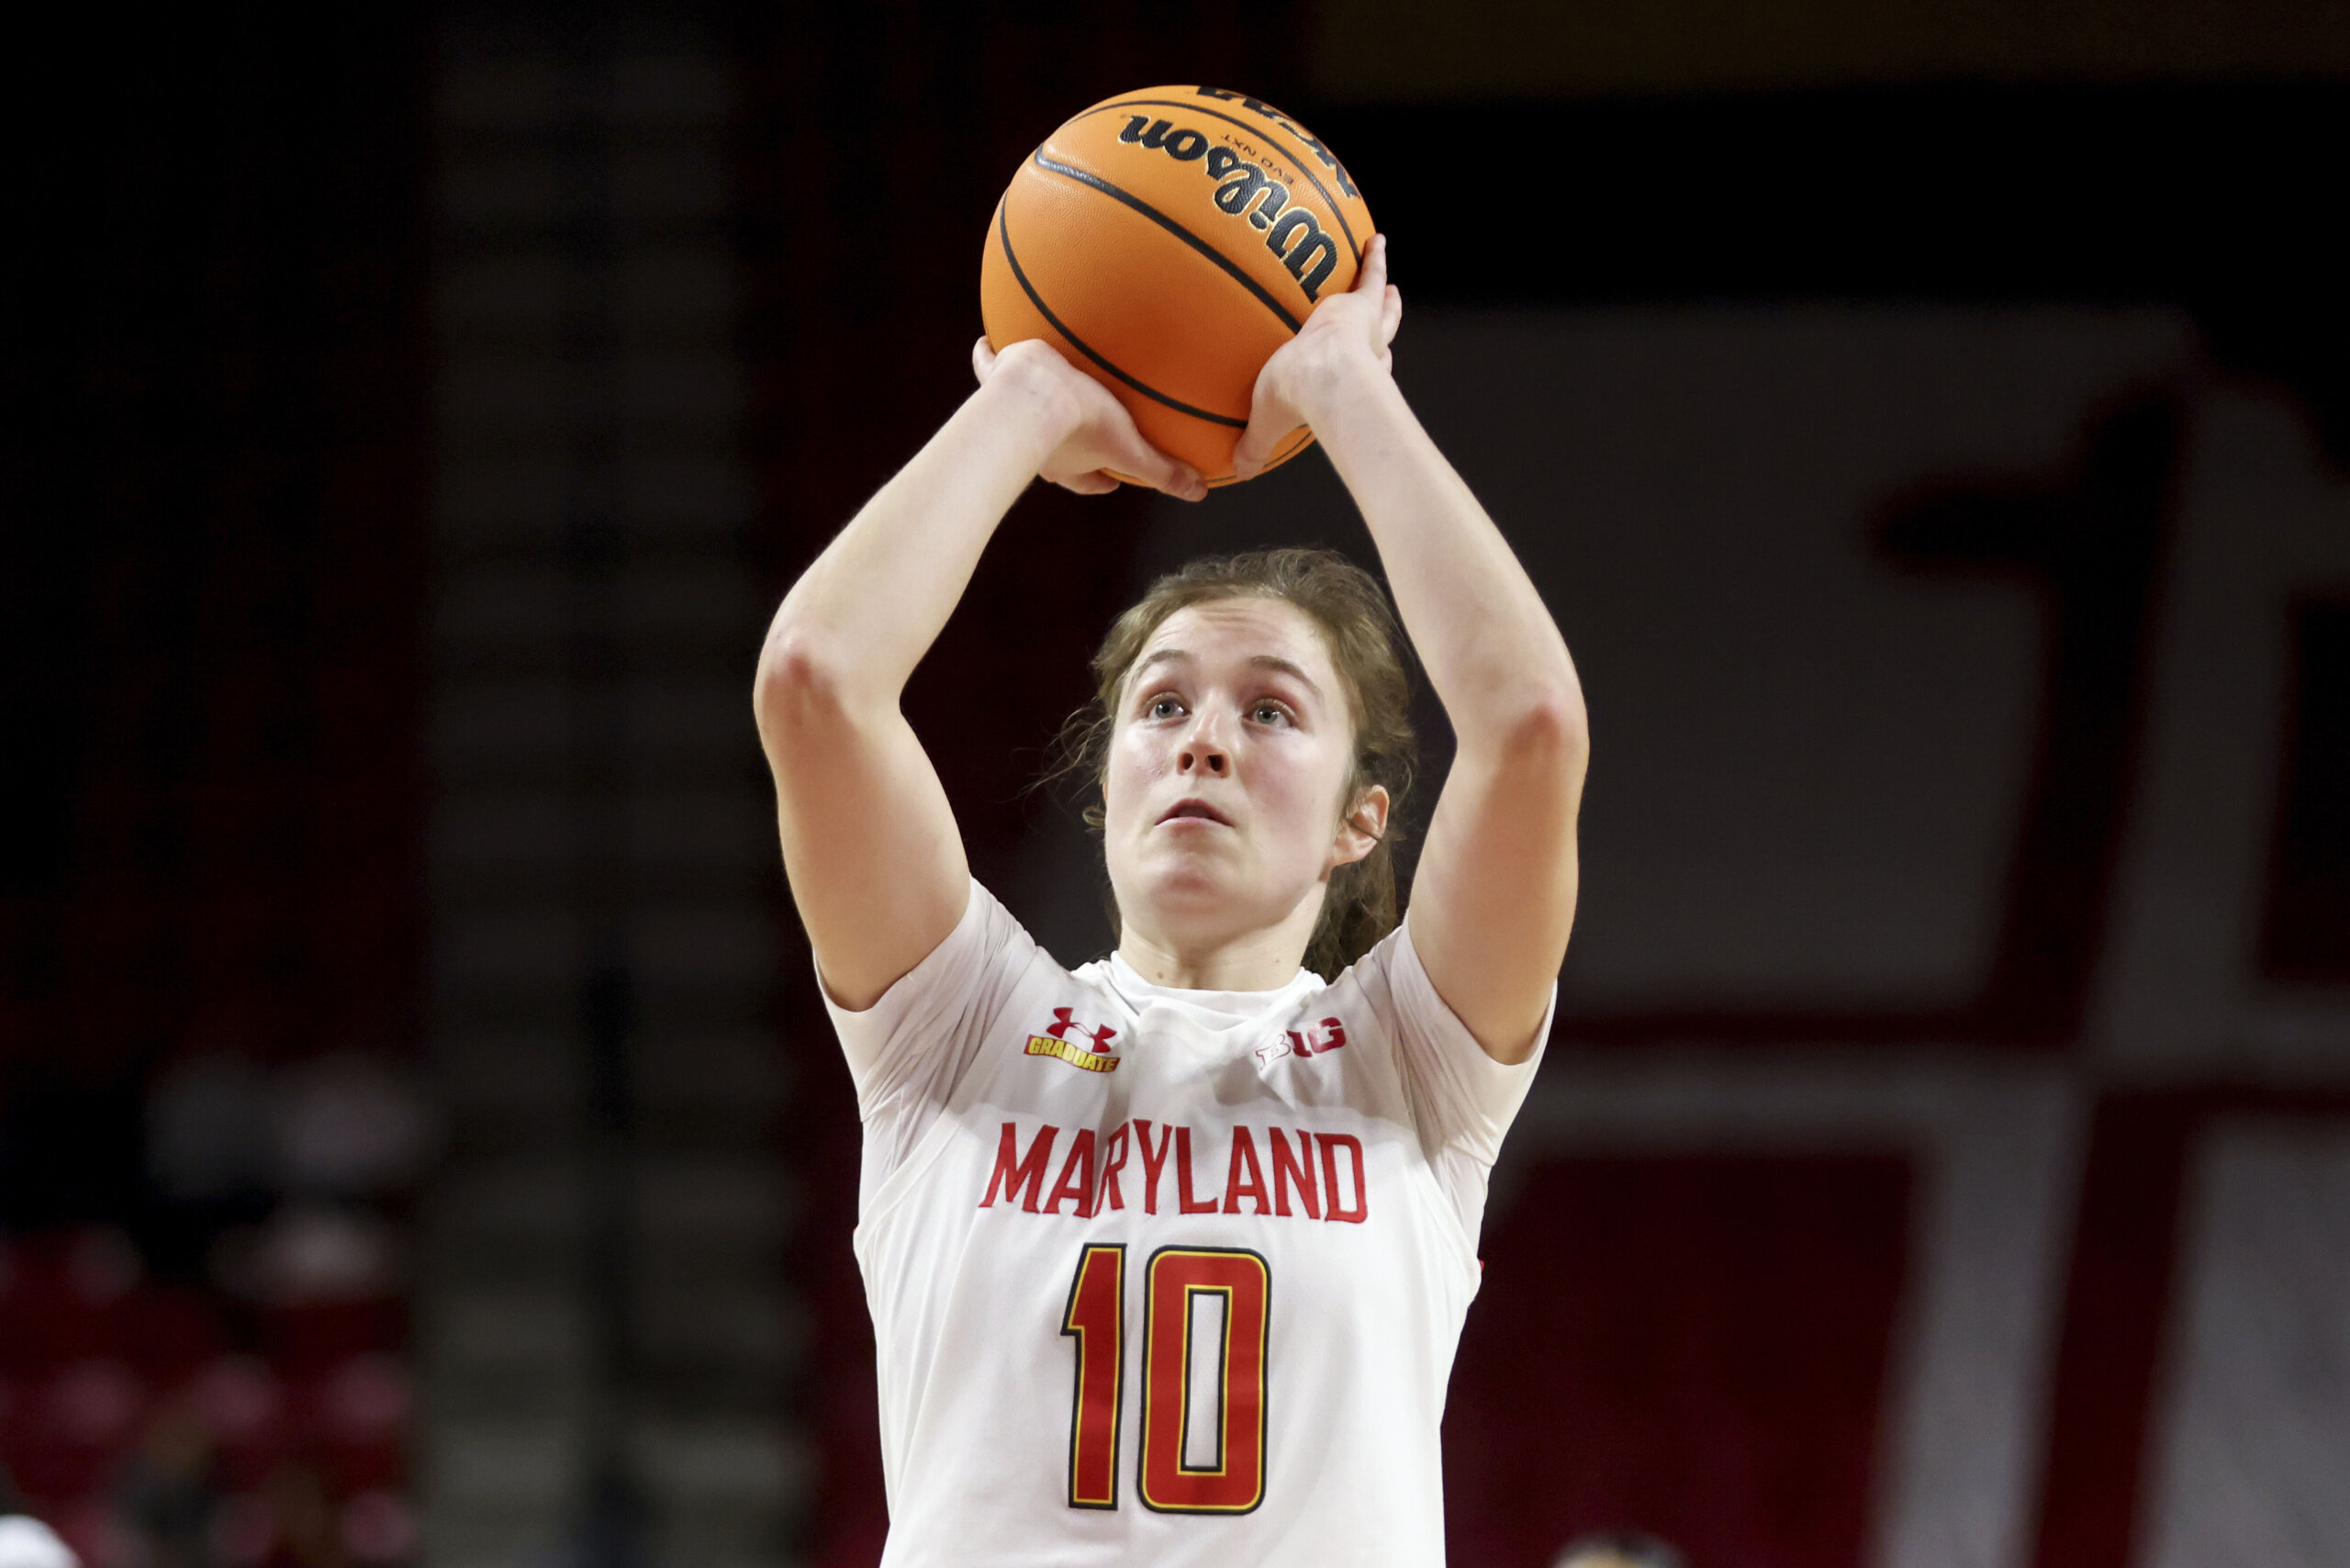 Meyers scores 24 to help No. 8 Maryland women top Penn State